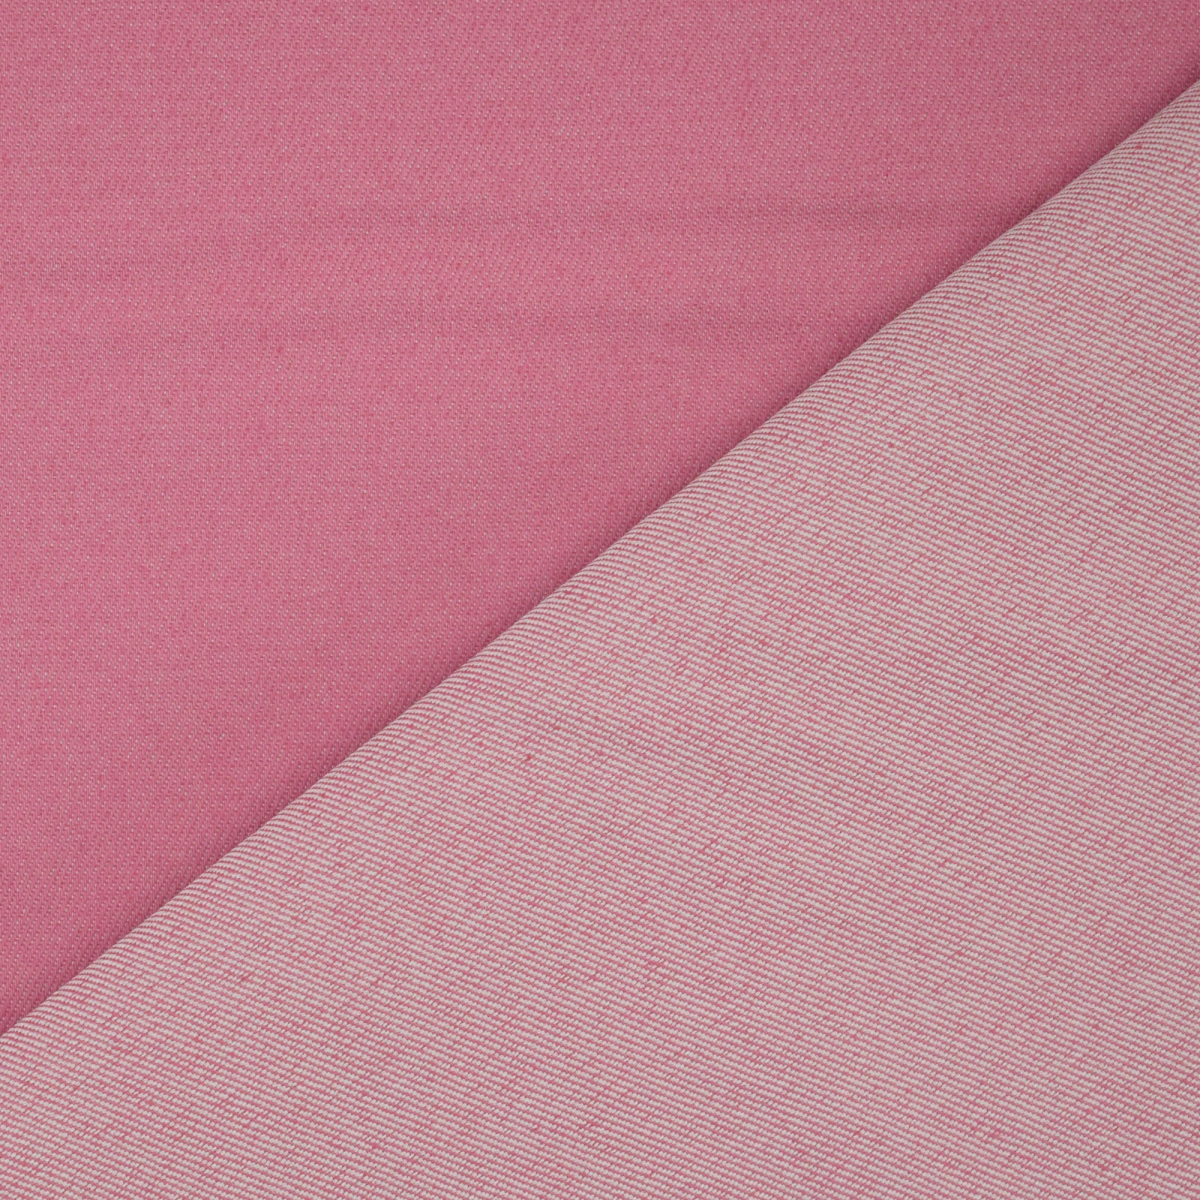 Wholesale pink denim fabric For A Classic Clothing Style 